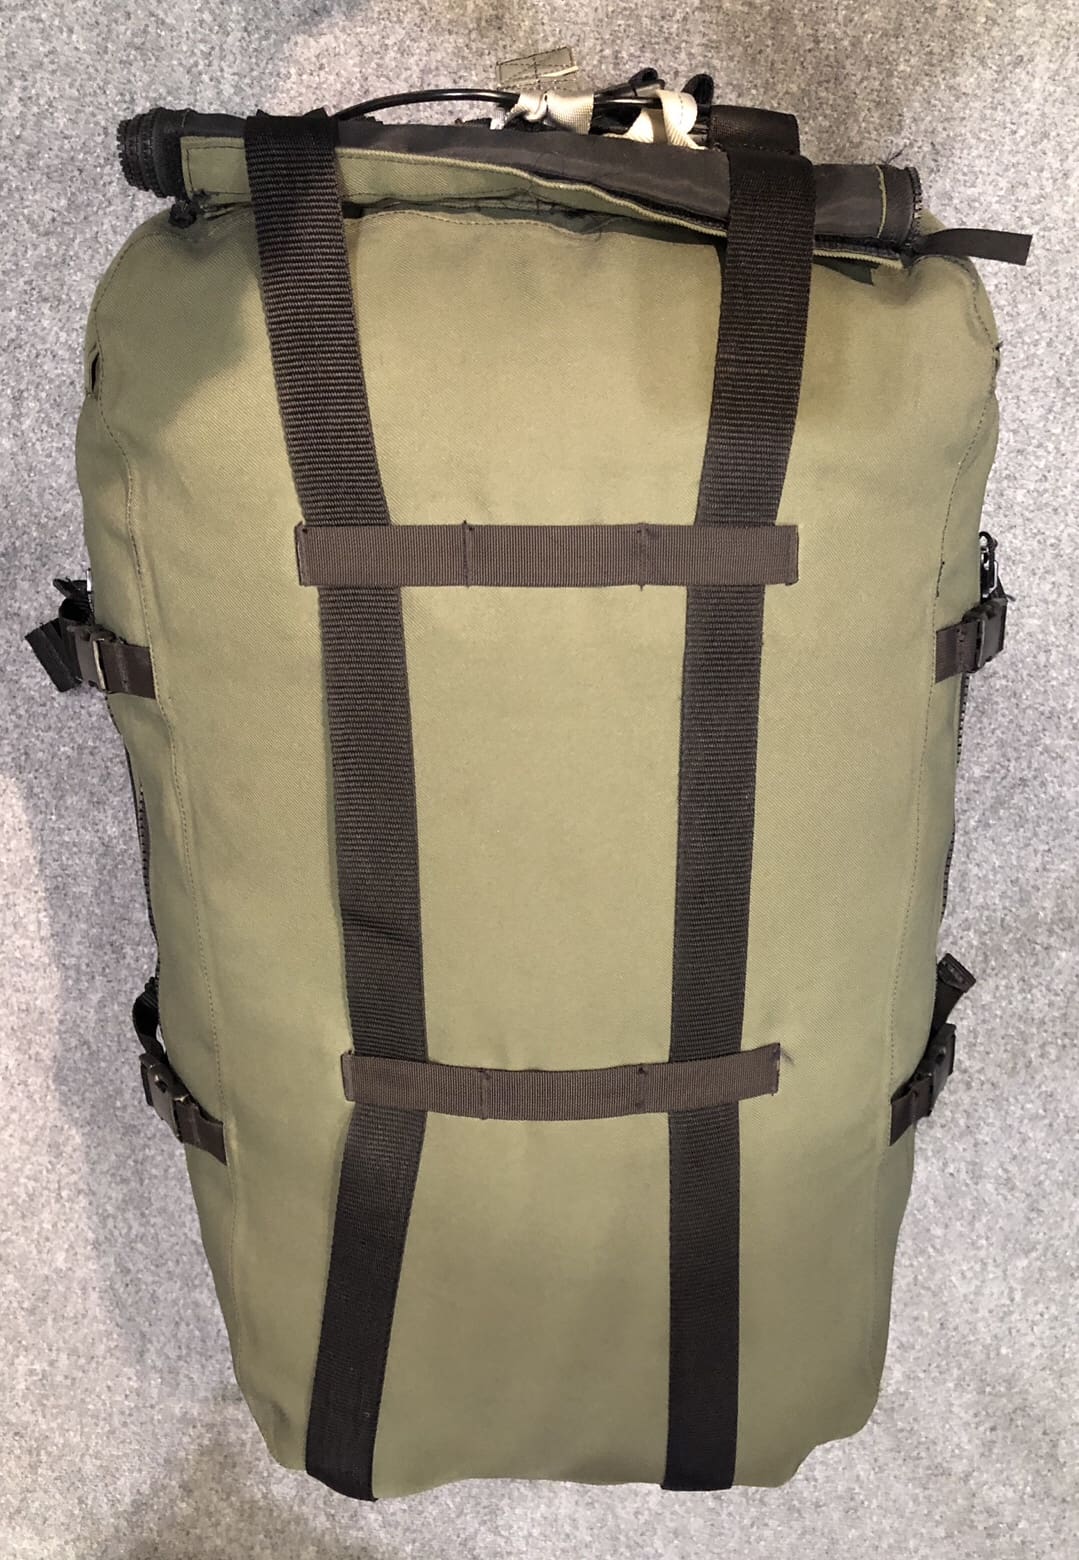 DSEI 19 – Osprey Drop Dry Bag from Typhoon - Soldier Systems Daily